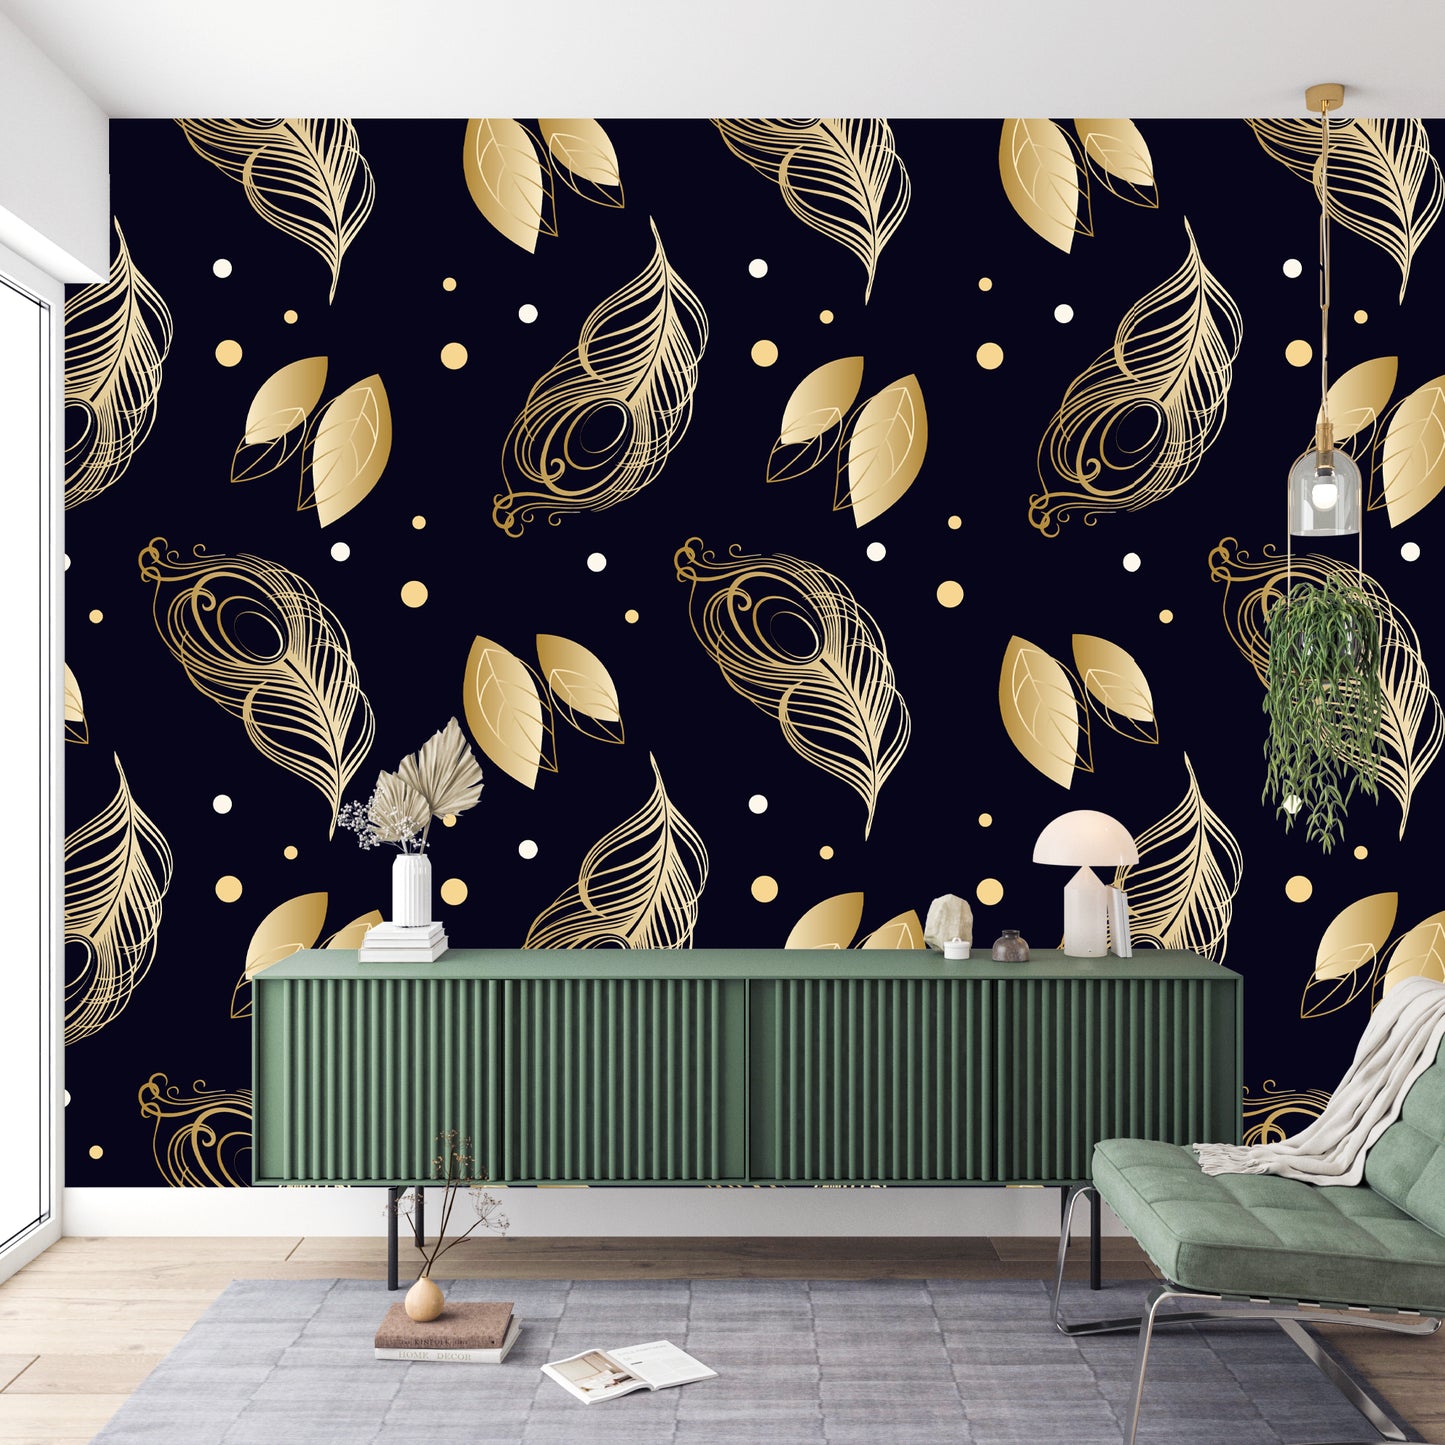 seamless-pattern-golden-peacock-feathers-leaves-black-wallpaper-wallpaper-textile